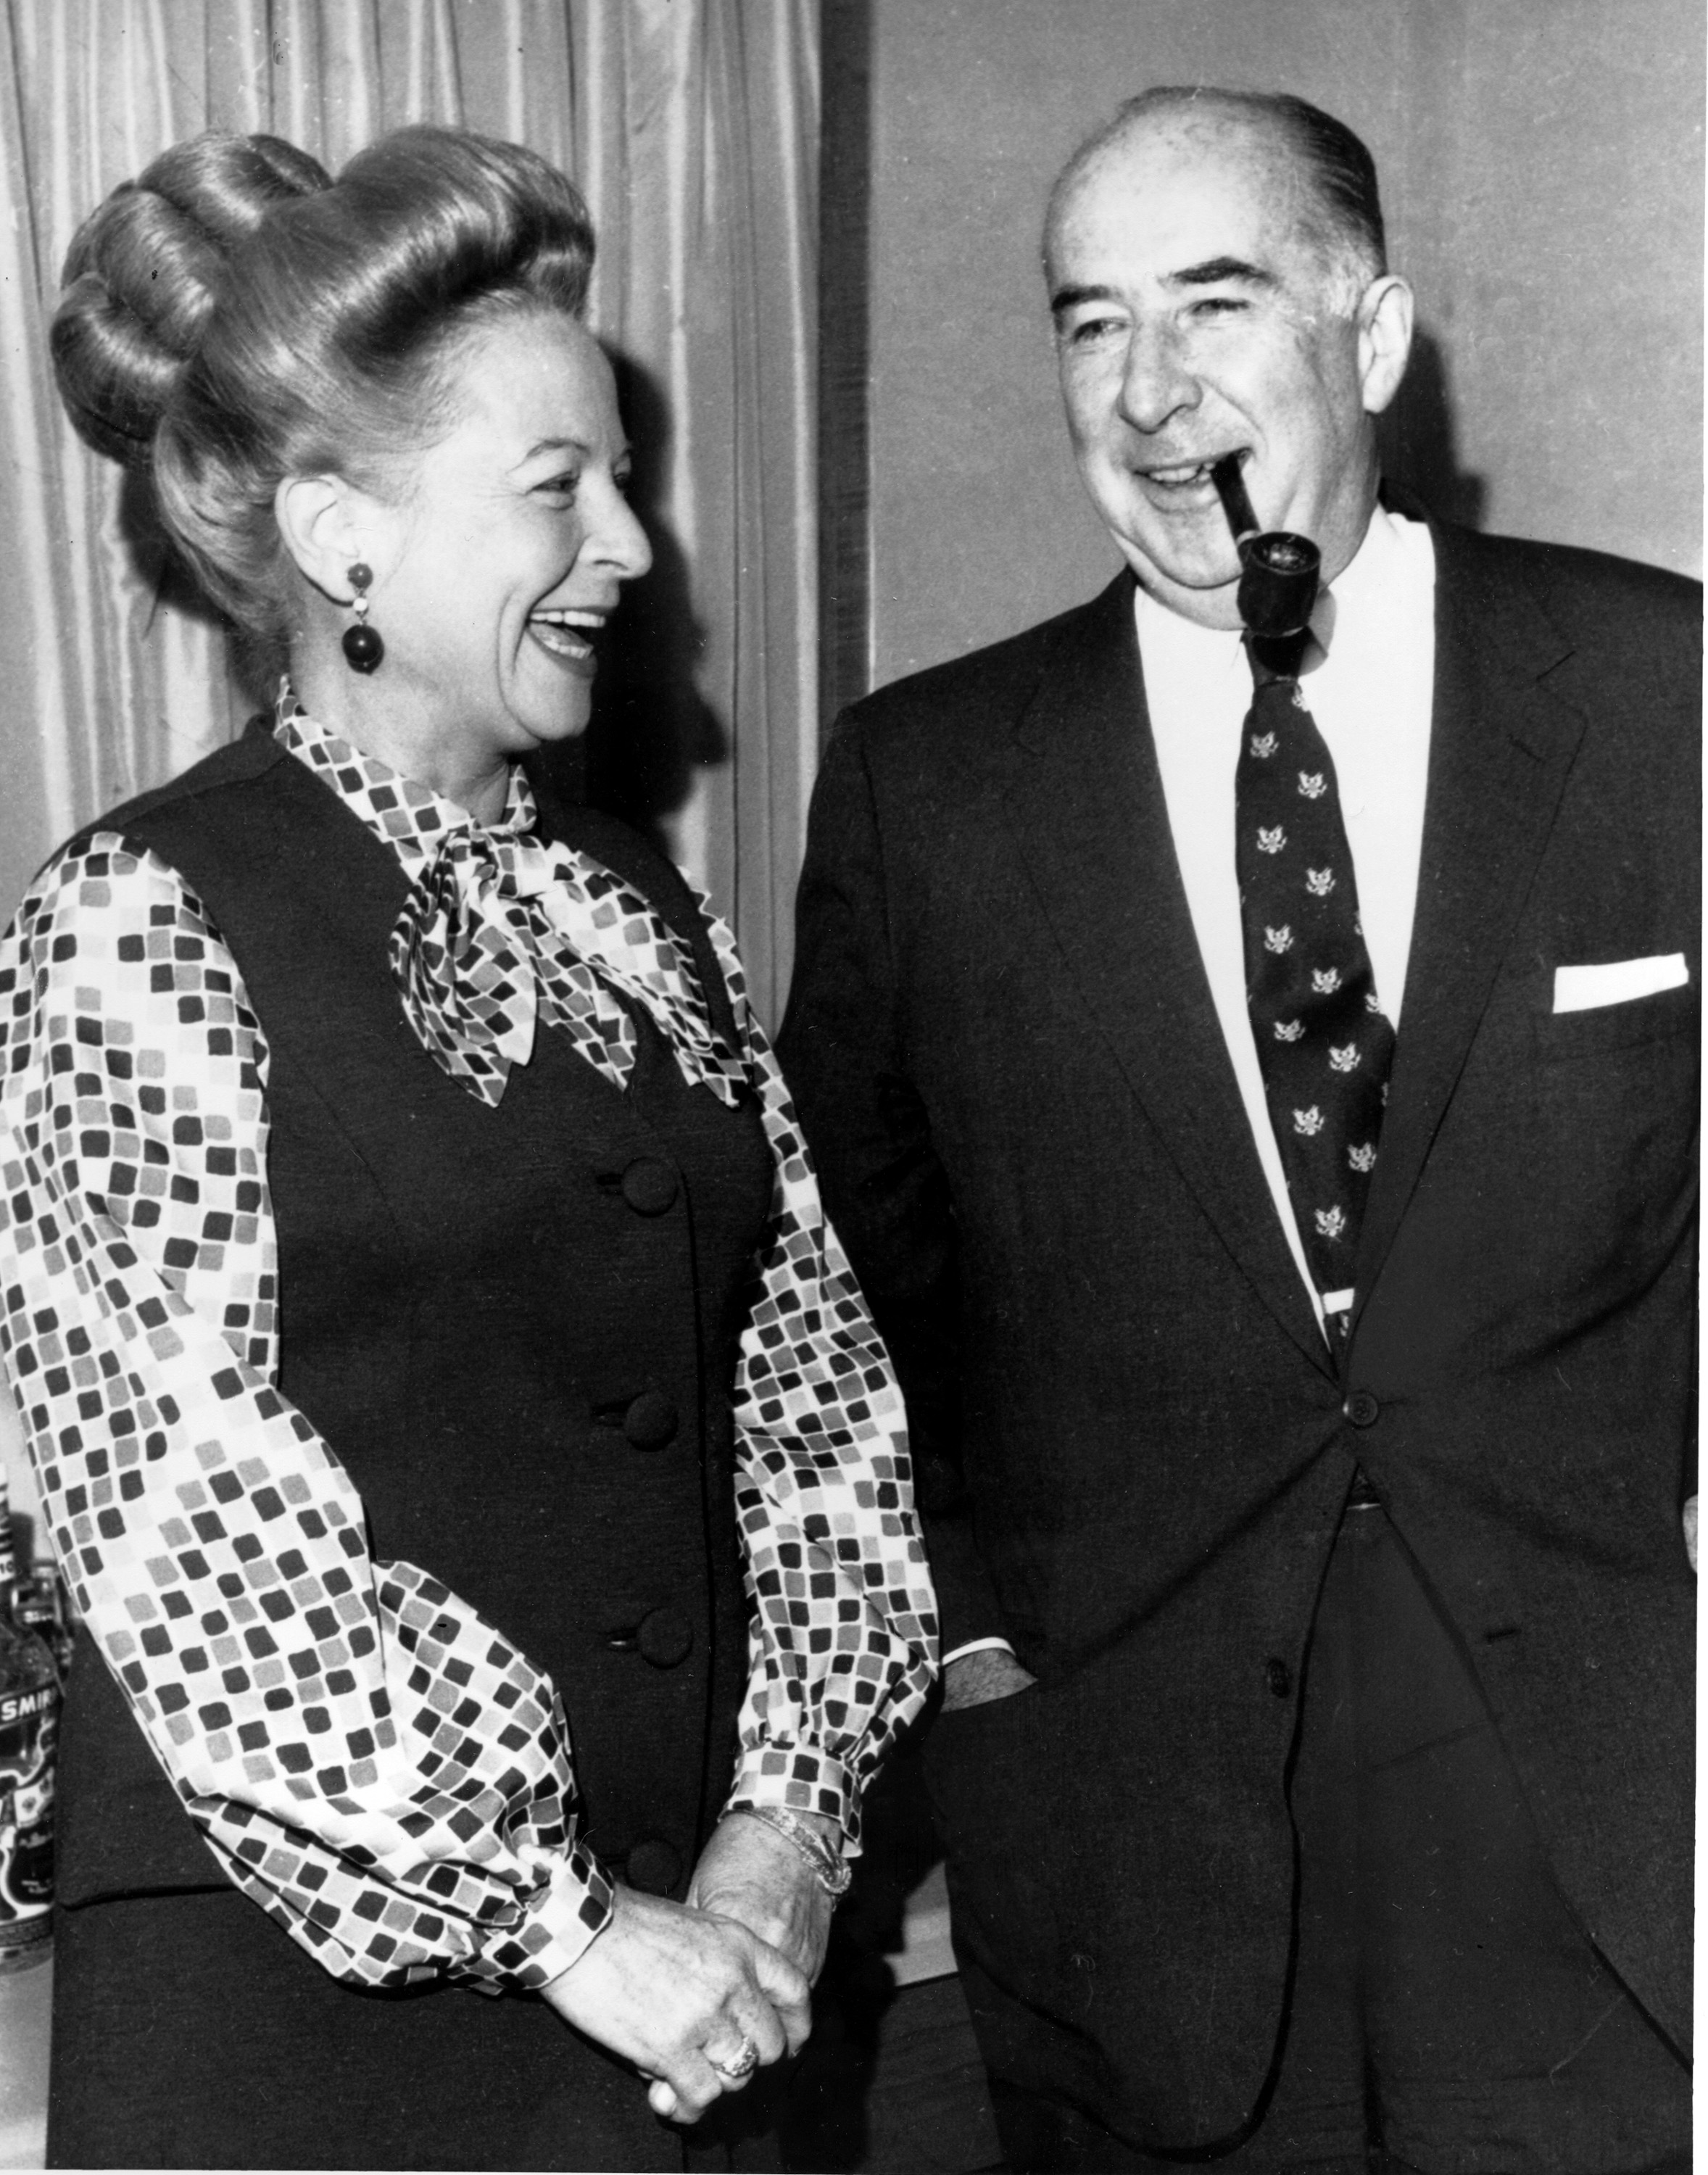 U.S. Attorney General John N. Mitchell and his wife Martha Mitchell at the White House in 1971.